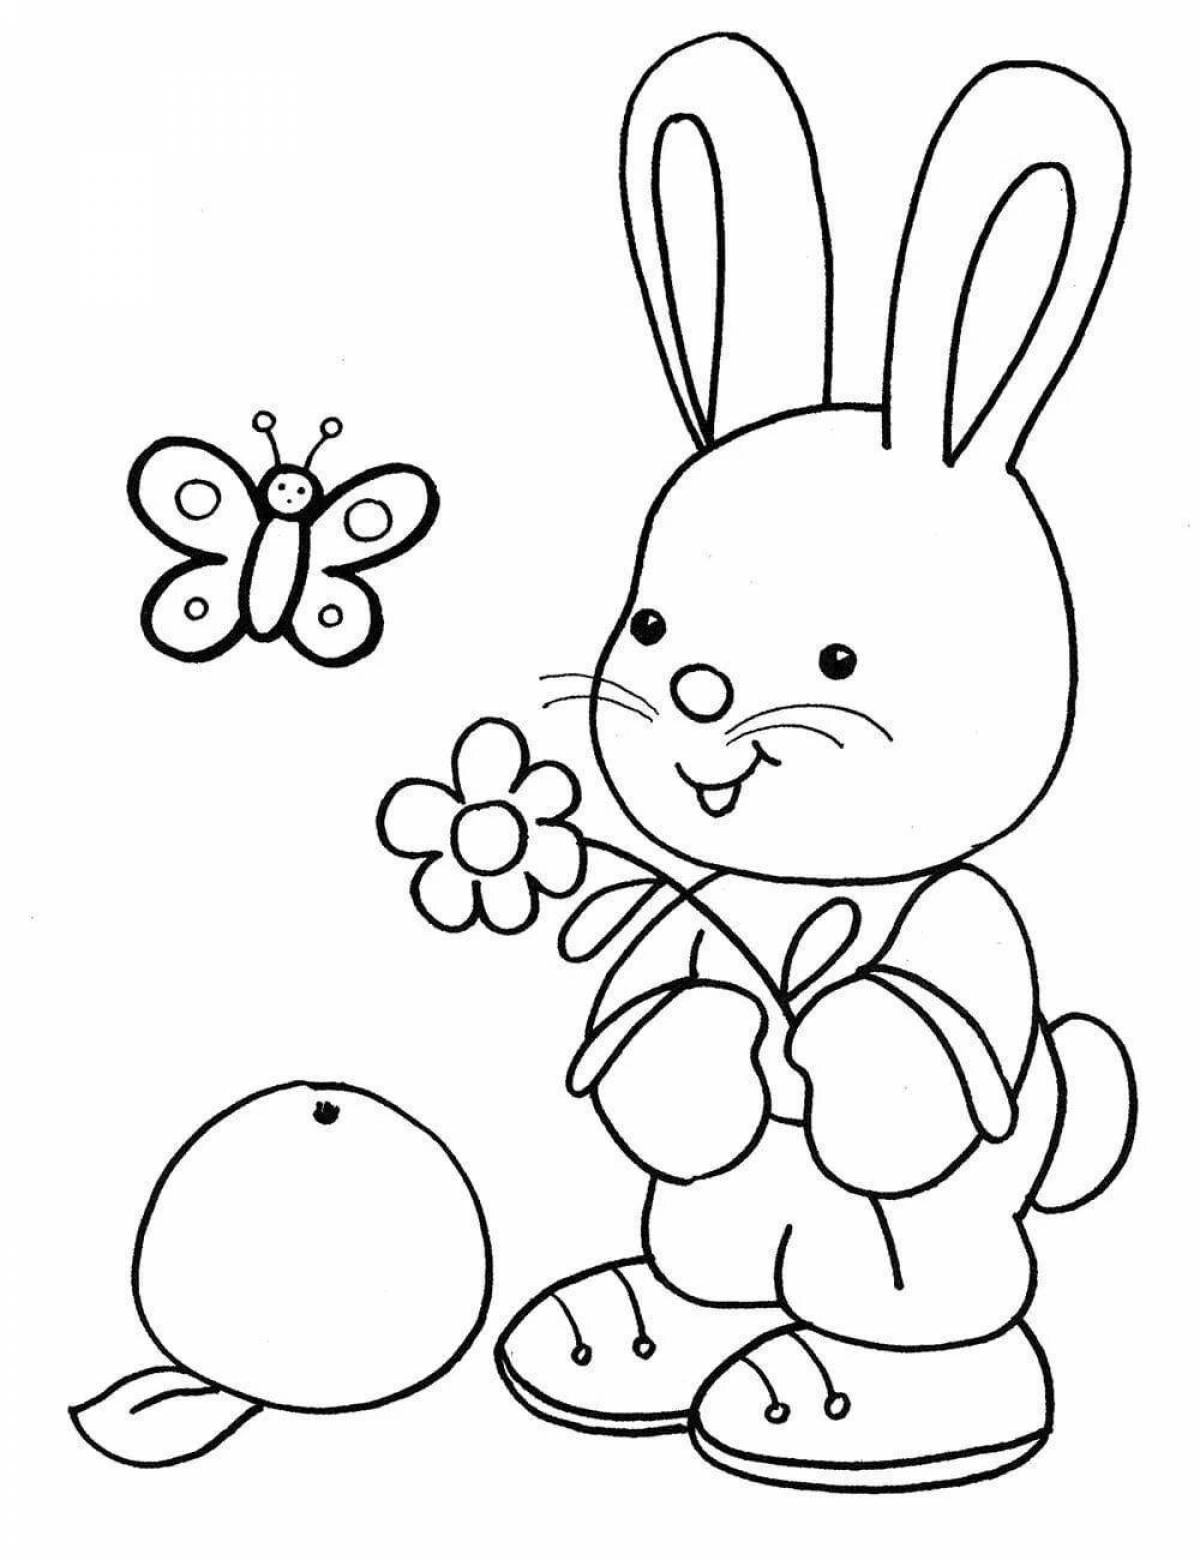 Coloring hare for games for children